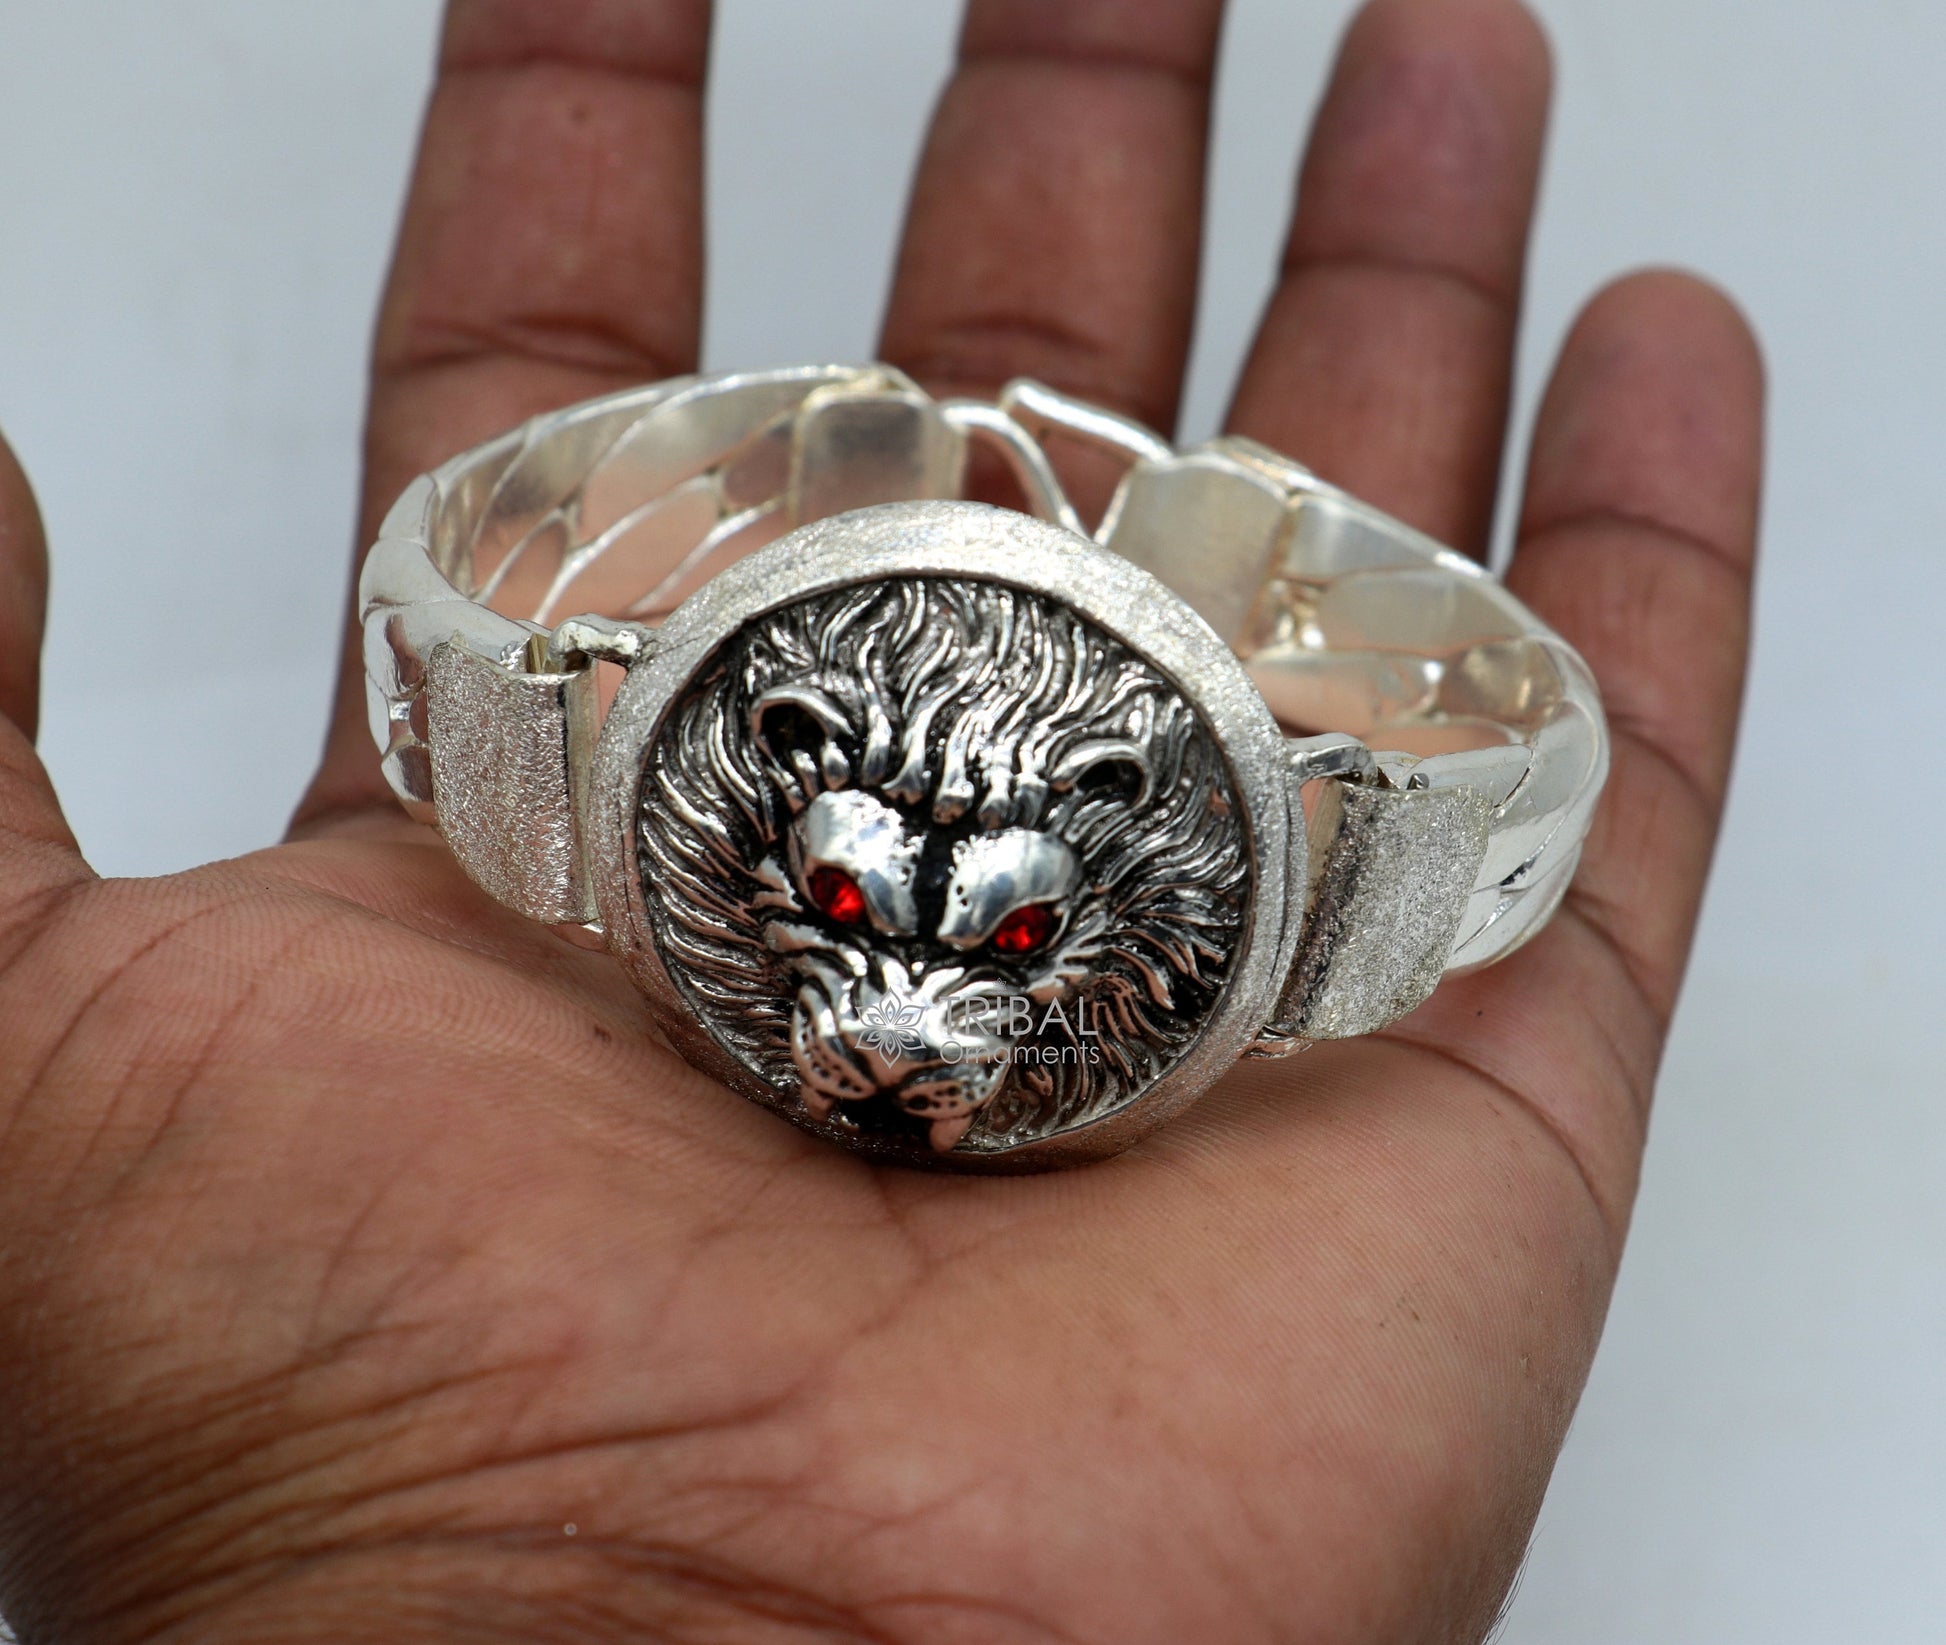 925 sterling silver fabulous lion face cultural stylish attractive kada bracelet pretty work attractive tribal belly dance jewelry sbr665 - TRIBAL ORNAMENTS